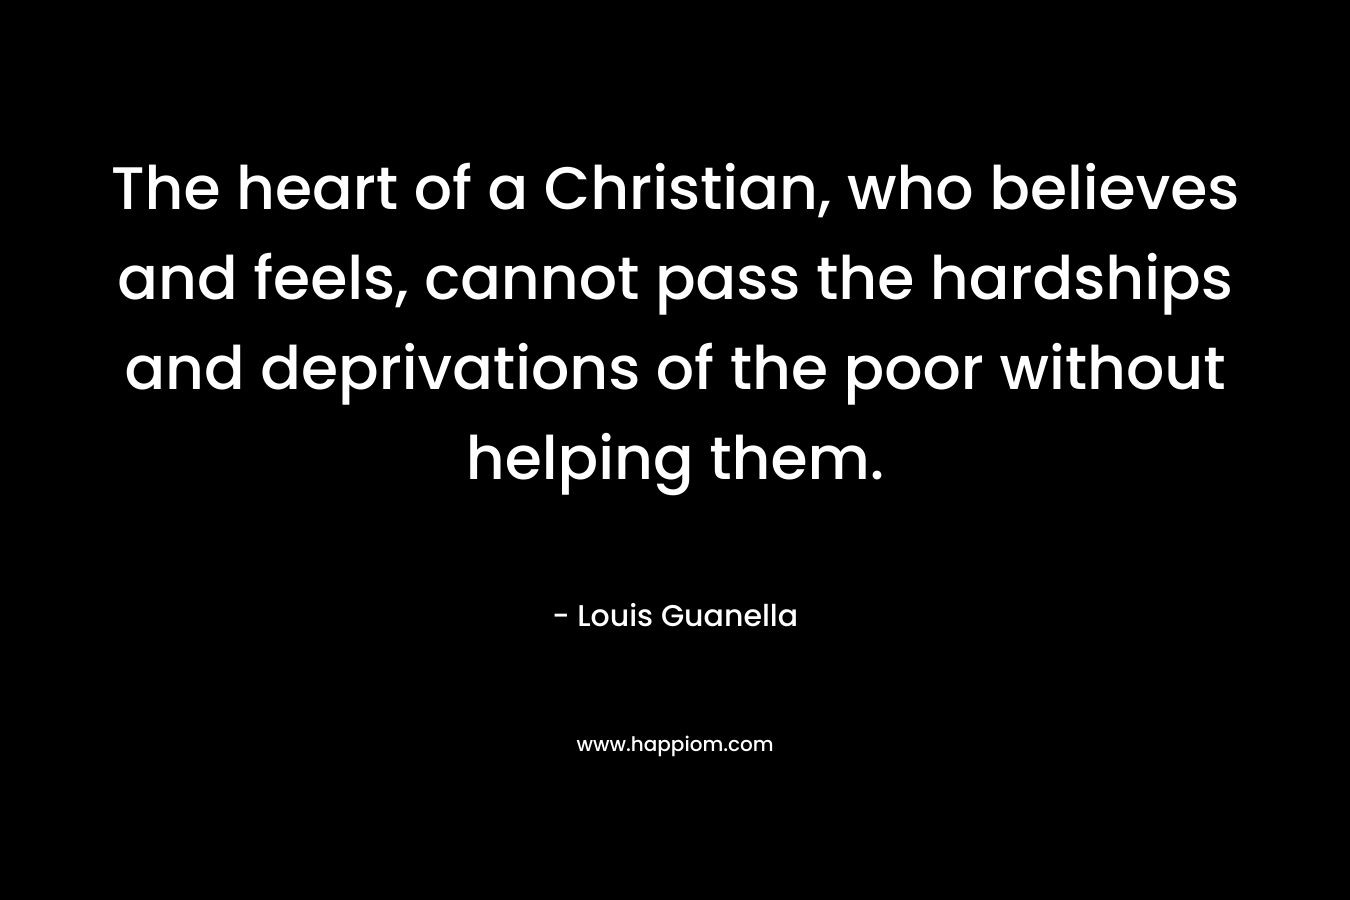 The heart of a Christian, who believes and feels, cannot pass the hardships and deprivations of the poor without helping them. – Louis Guanella